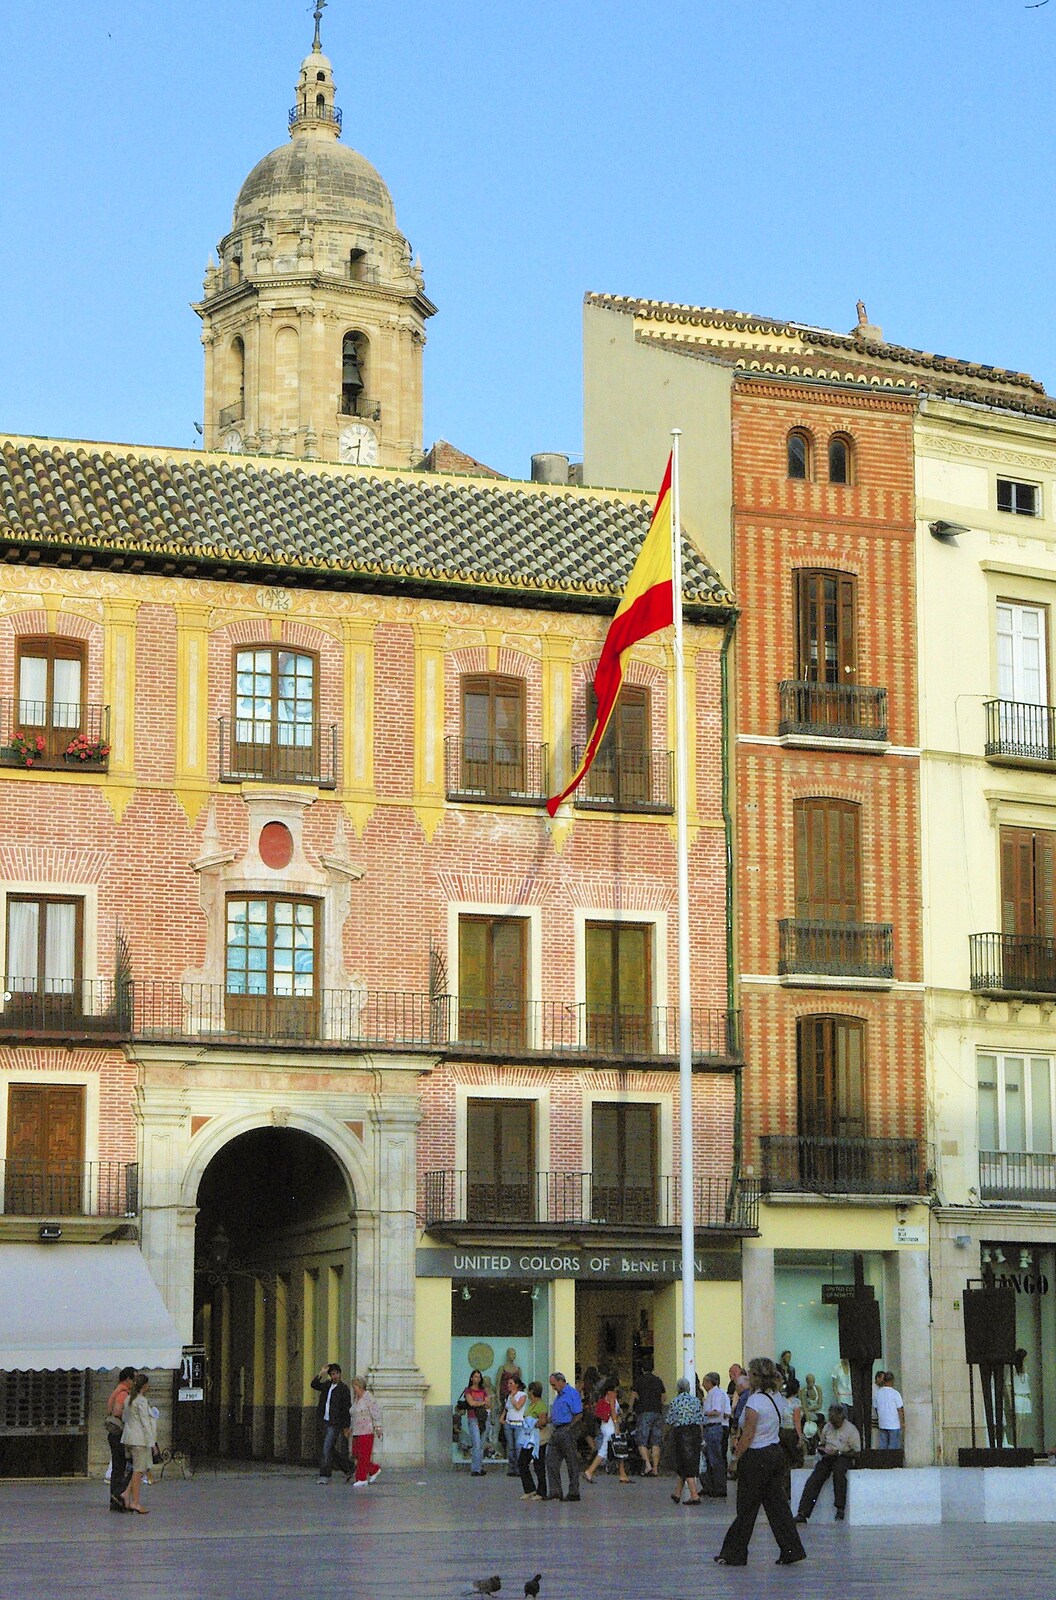 The Spanish flag flutters in a town square from Working at Telefónica, Malaga, Spain - 6th June 2006